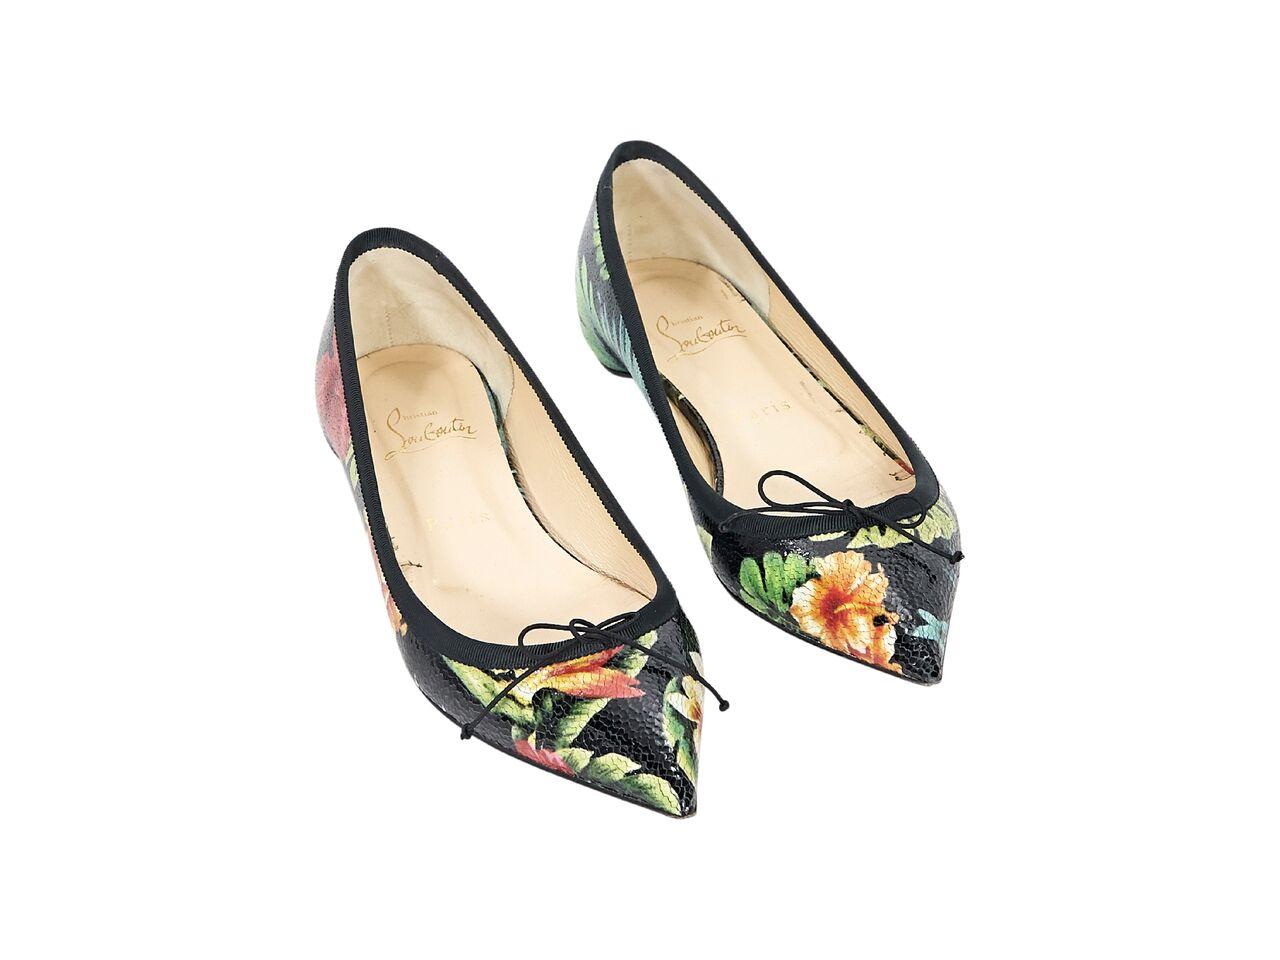 Product details:  Multicolor Hawaiian floral-printed patent leather Solasofia flats by Christian Louboutin.  Point toe.  Iconic red sole.  Slip-on style. 
Condition: Pre-owned. Very good. 
Est. Retail $ 995.00